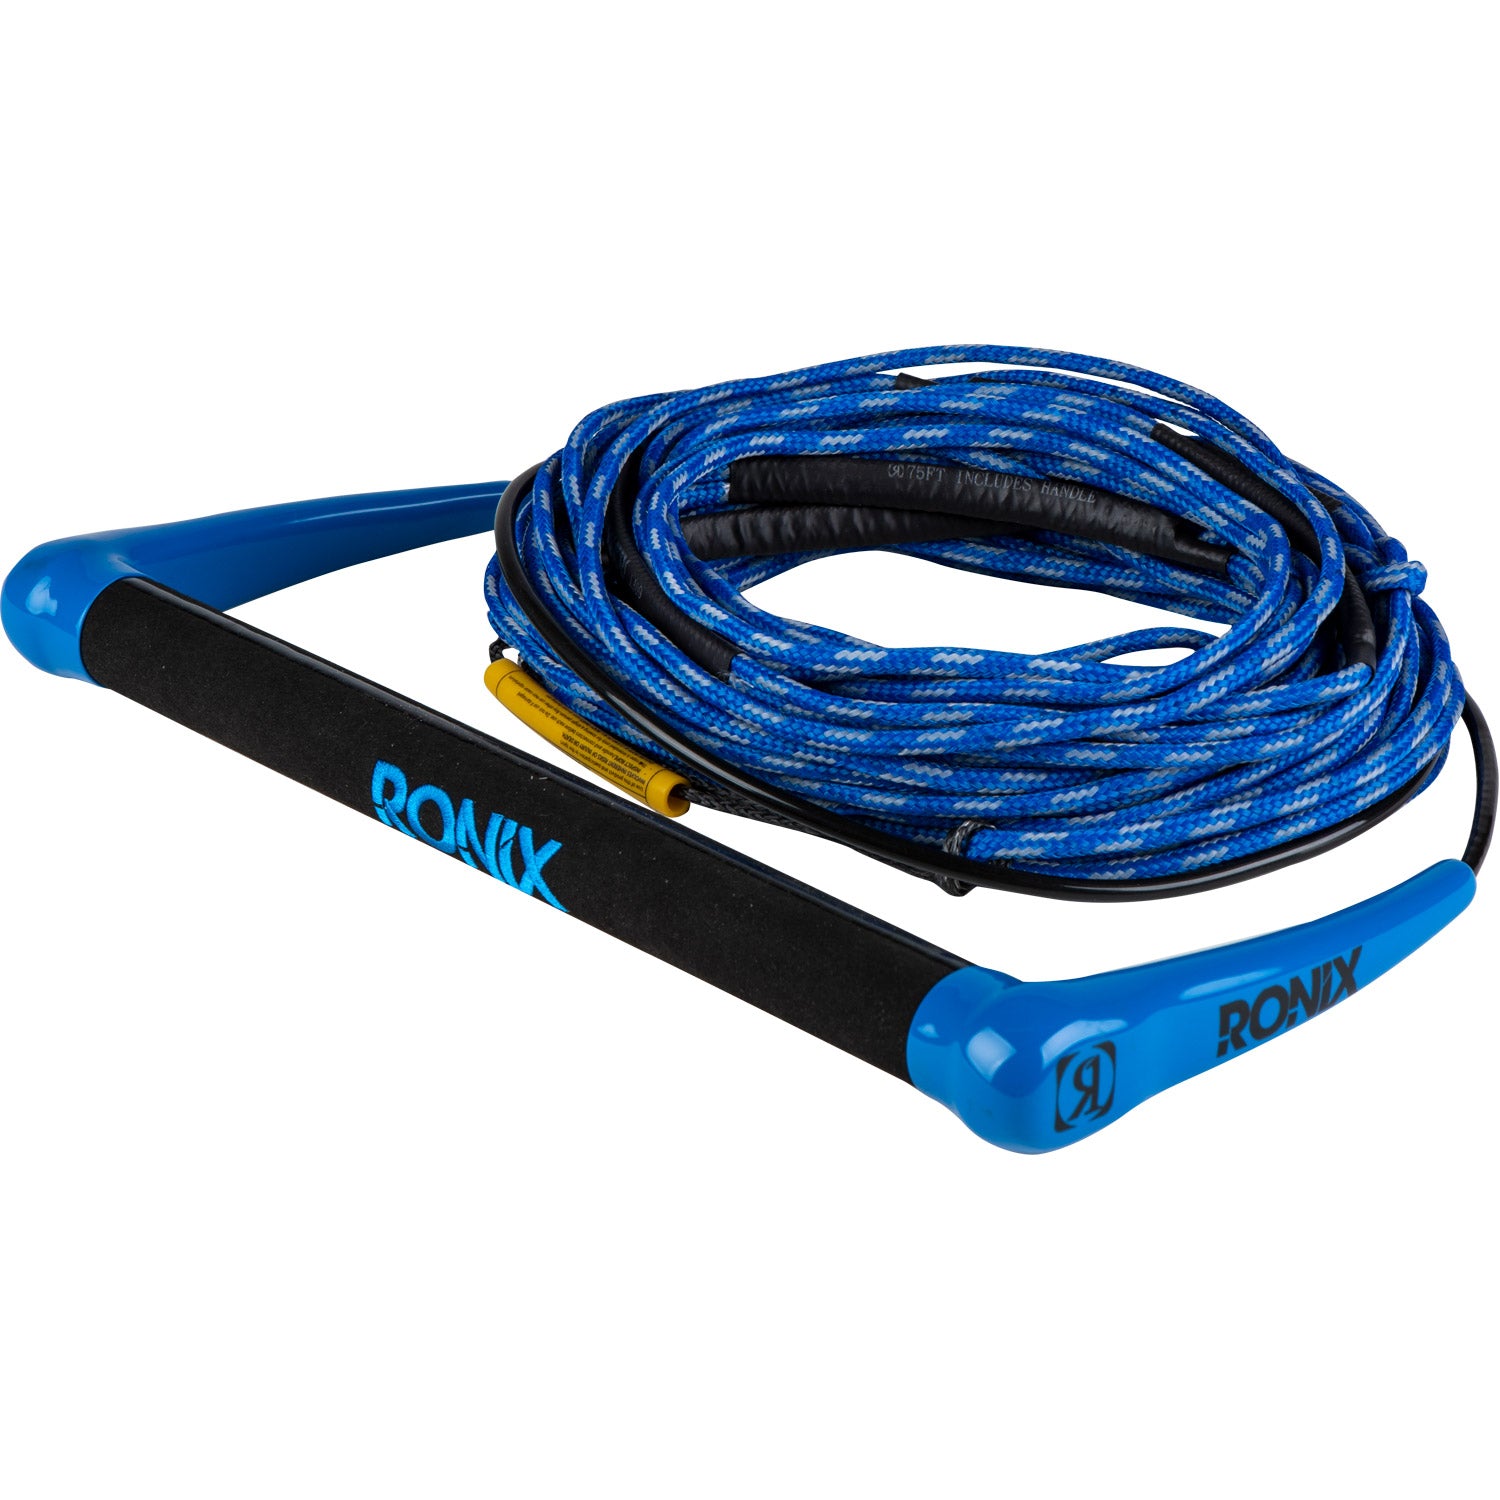 Combo 3.0 Wakeboard Rope Package